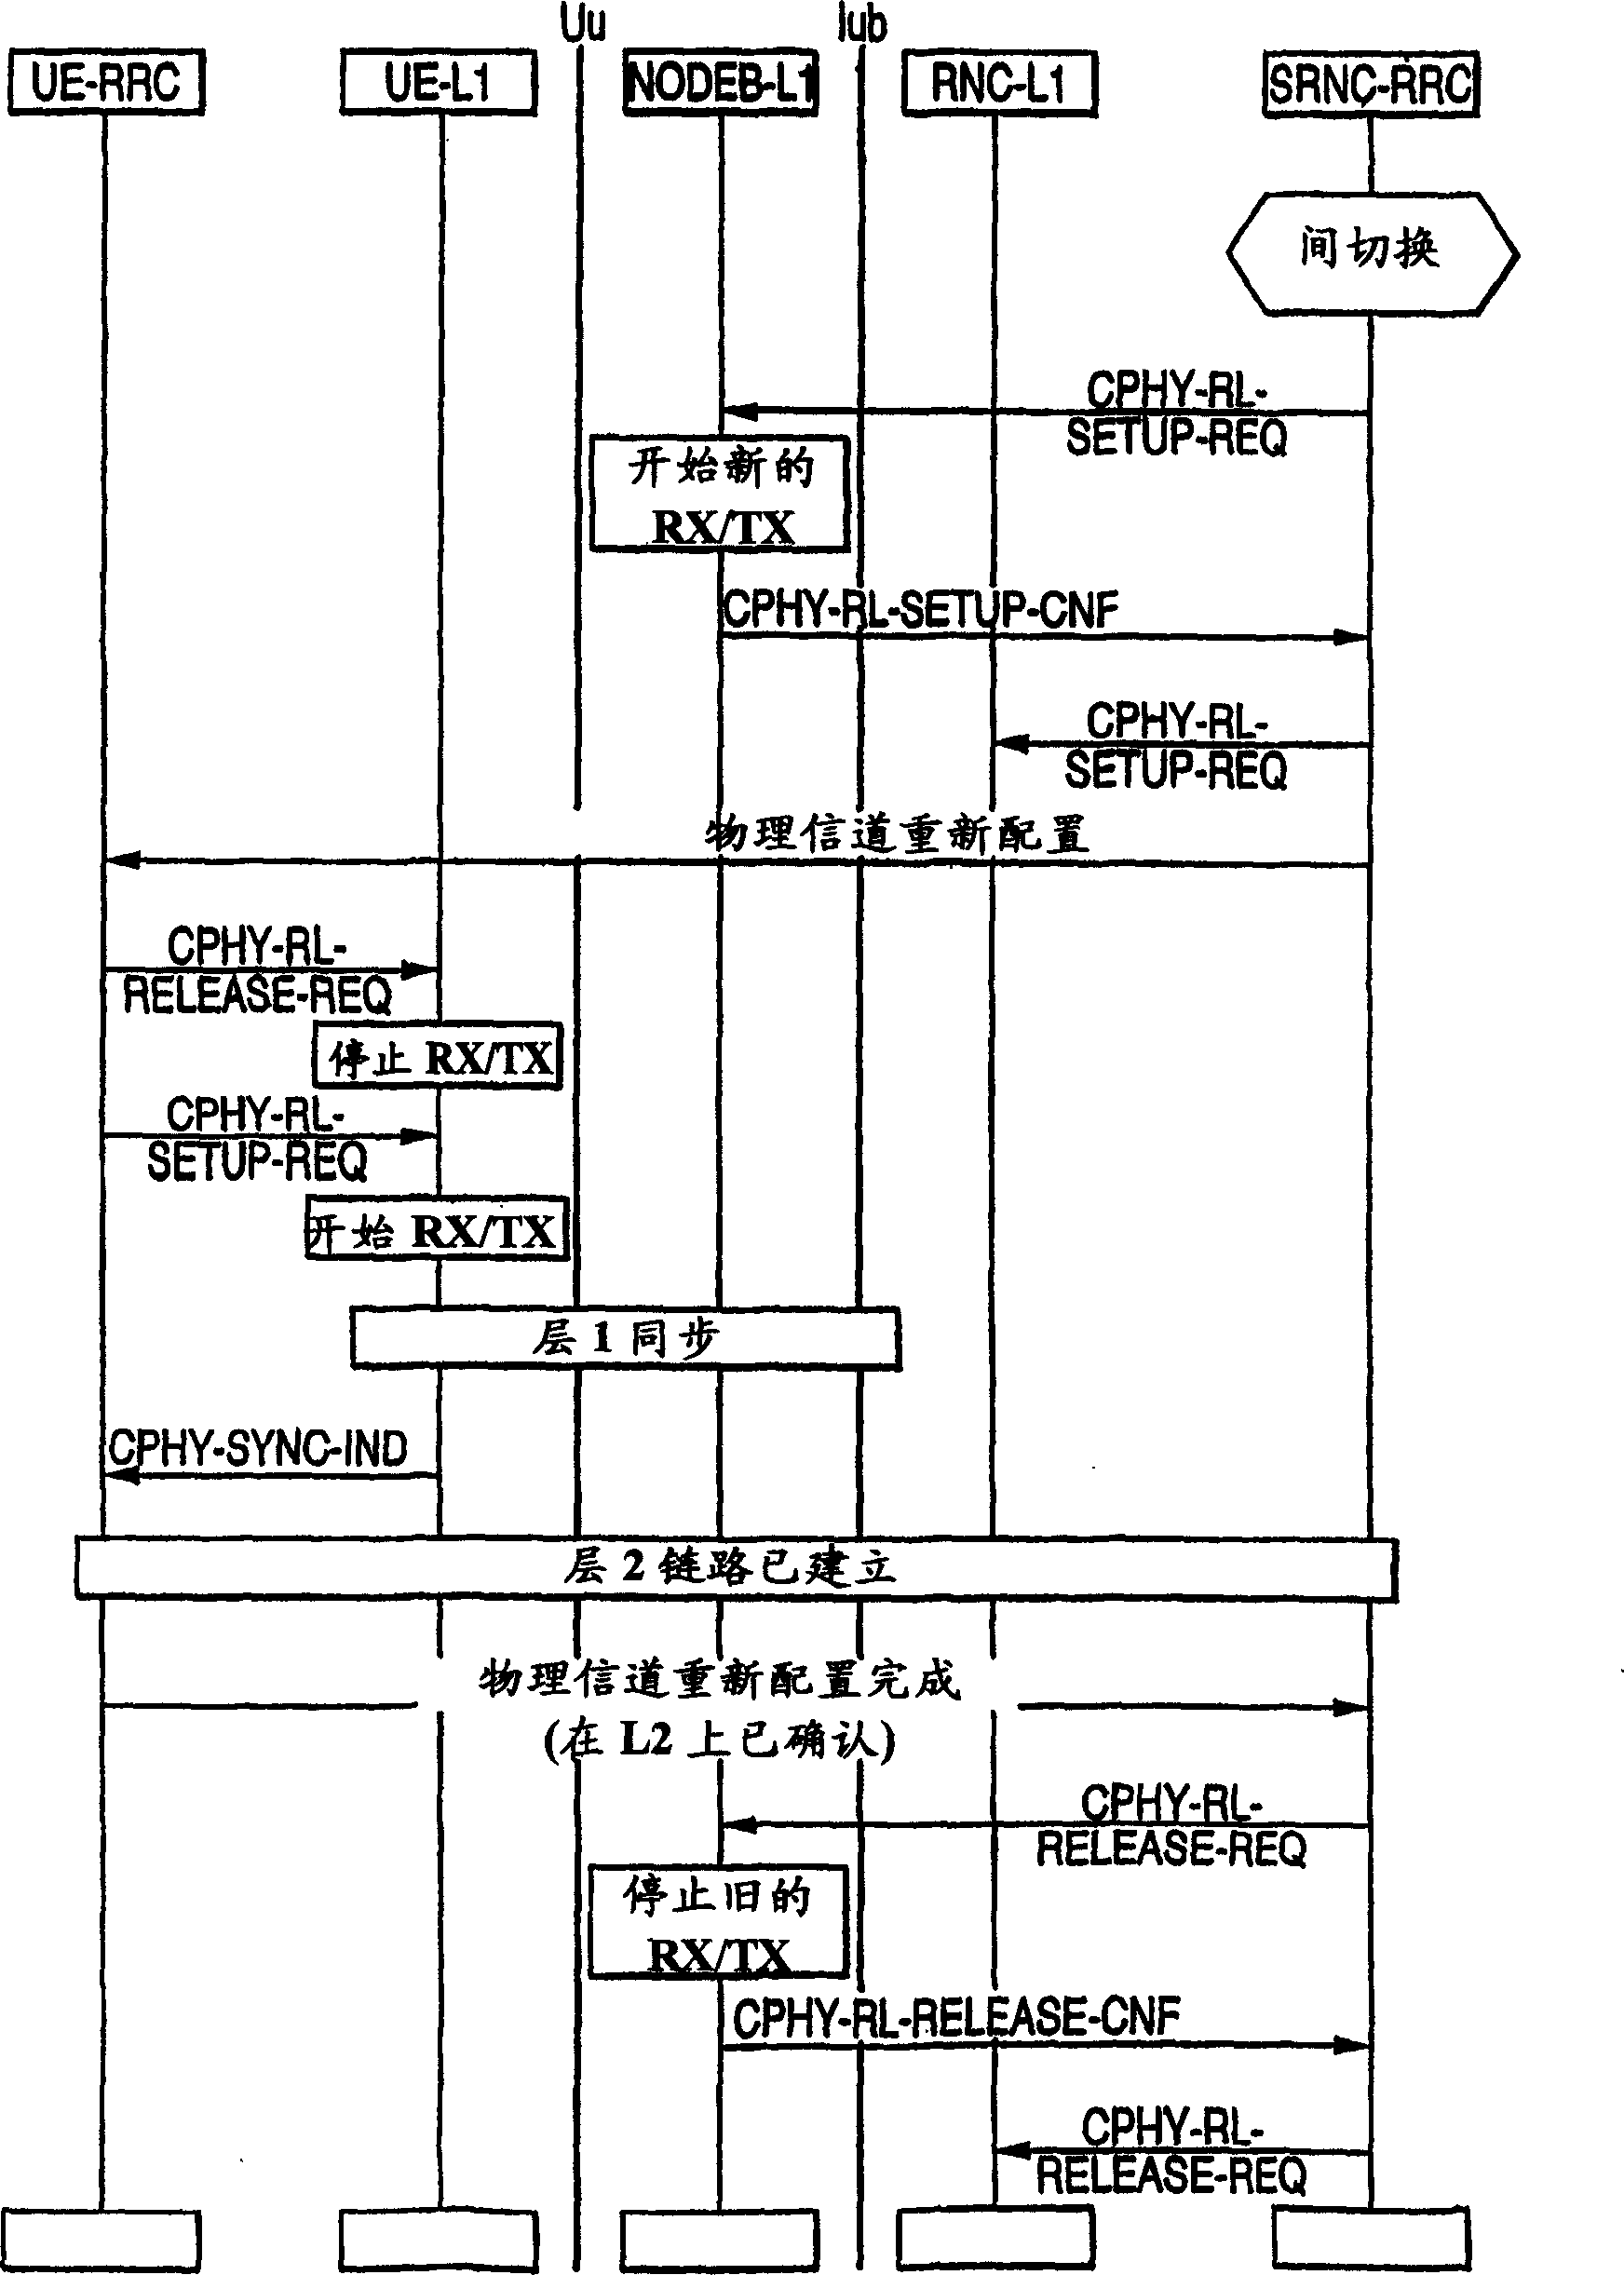 Handovers of user equipment connections in wireless communication systems